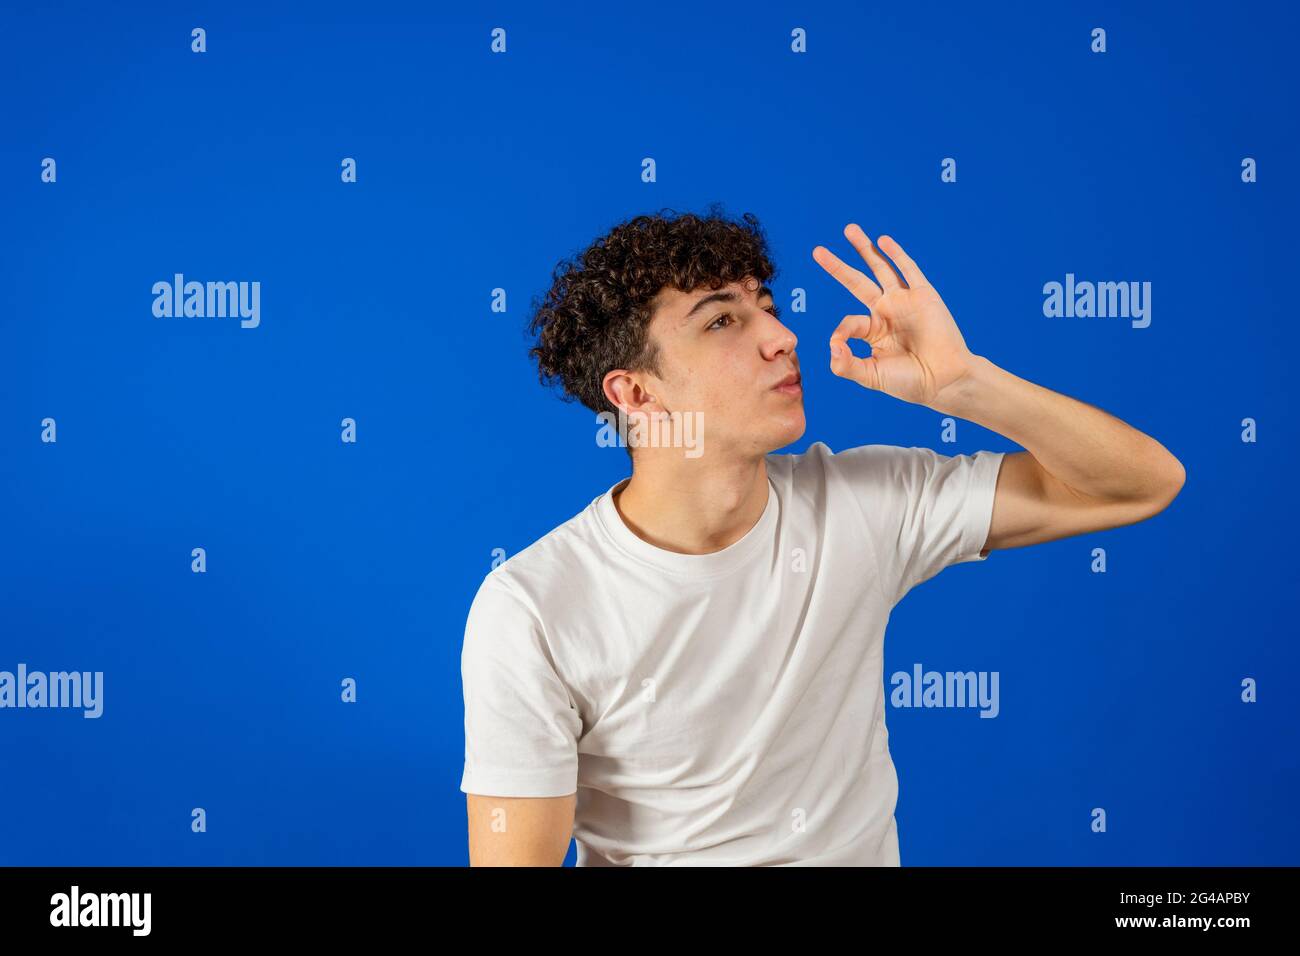 Attractive young man with curly hair making thumb sucking gesture isolated on blue studio background. Gesture concept Stock Photo